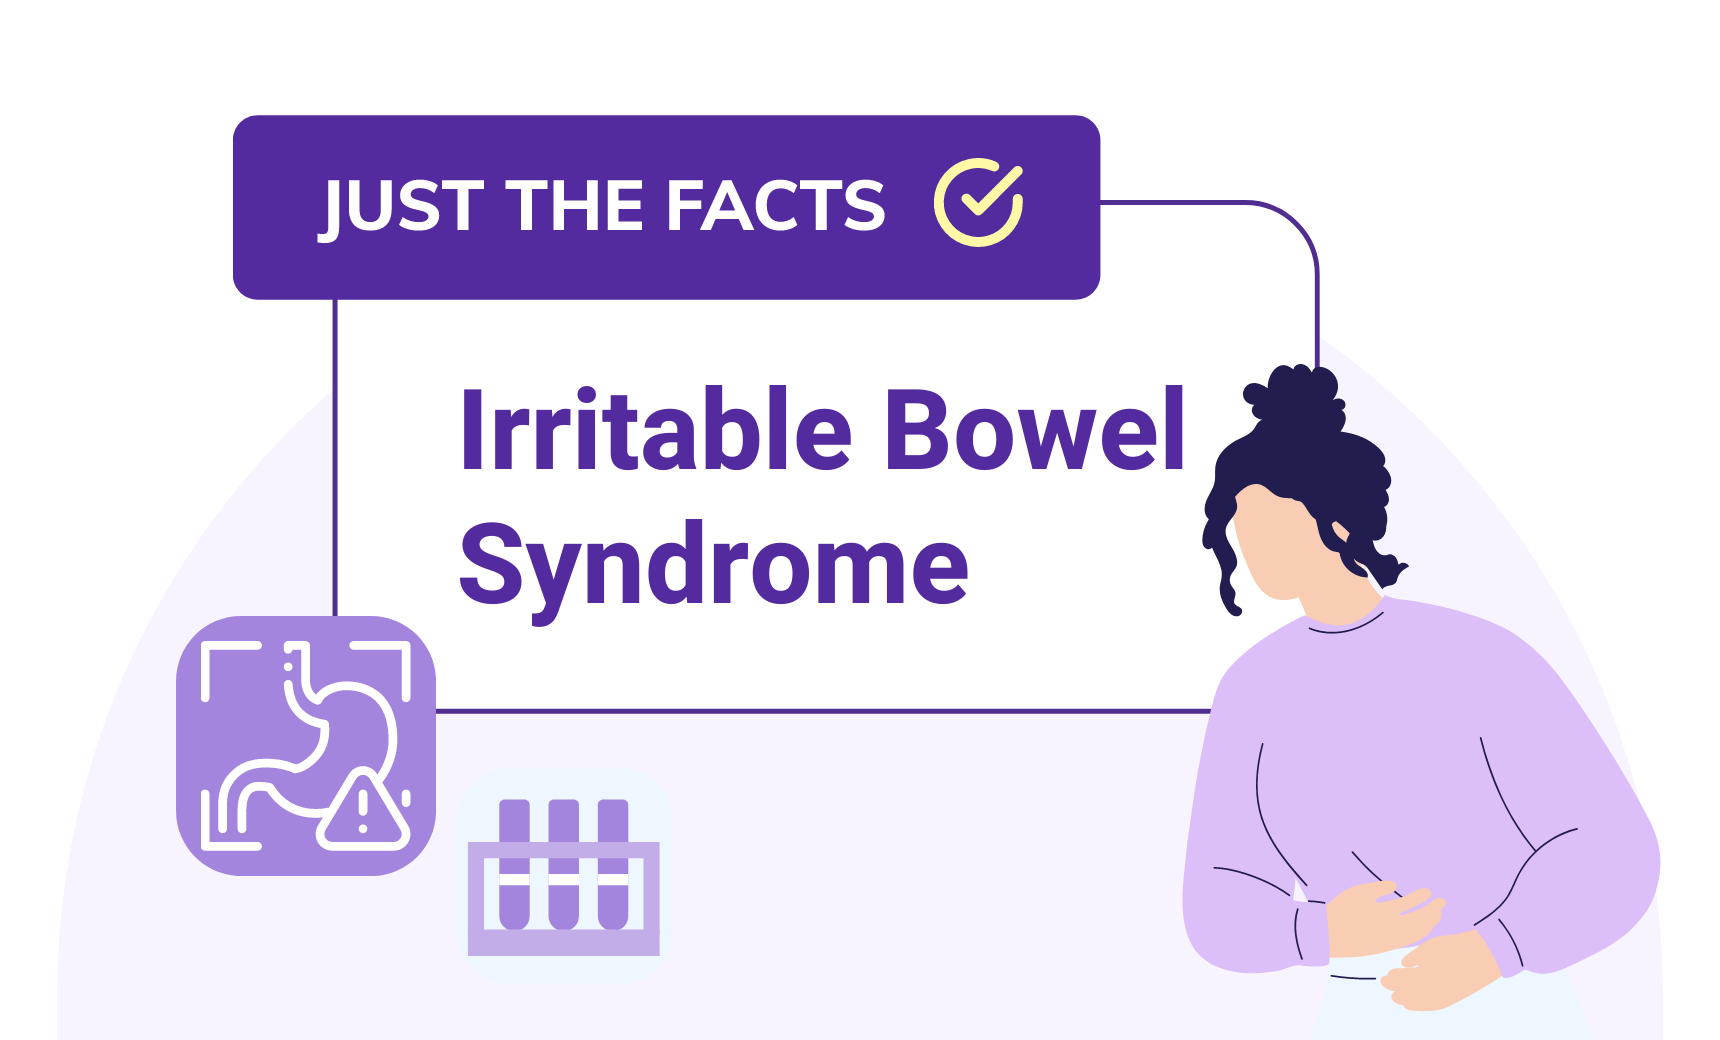 Just the Facts: Irritable Bowel Syndrome